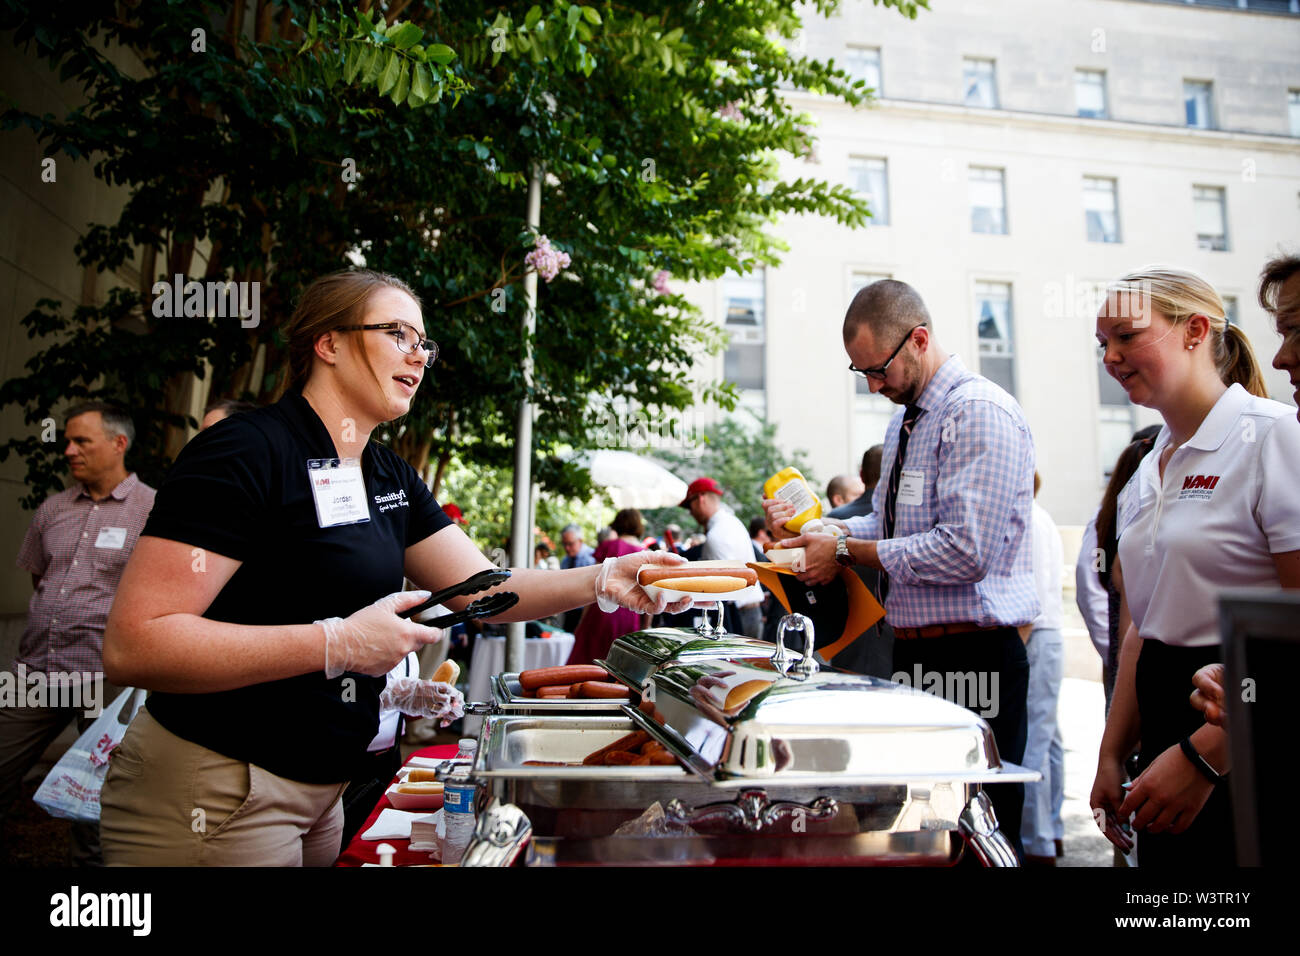 Washington, USA. 17th July, 2019. Hot dog vendors serve hot dogs to U.S. congressional members and staffers at the Rayburn House Office Building on Capitol Hill in Washington, DC, the United States, on July 17, 2019. The event was held here on Wednesday in celebration of the National Hot Dog Day. Credit: Ting Shen/Xinhua/Alamy Live News Stock Photo